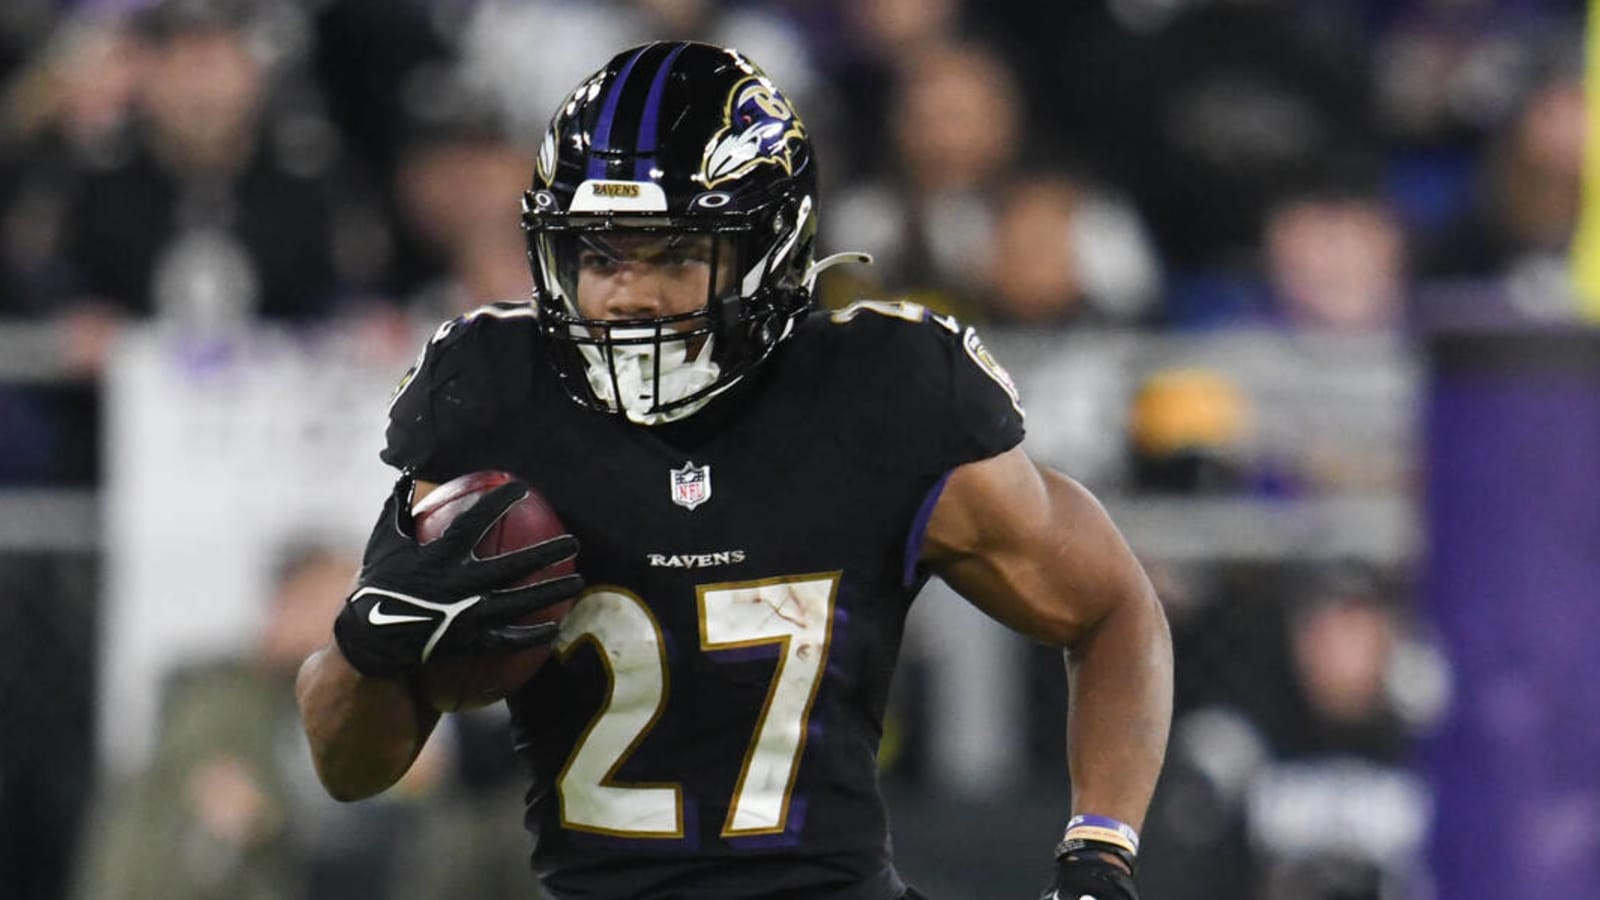 Ravens might have another contract issue with top player to worry about